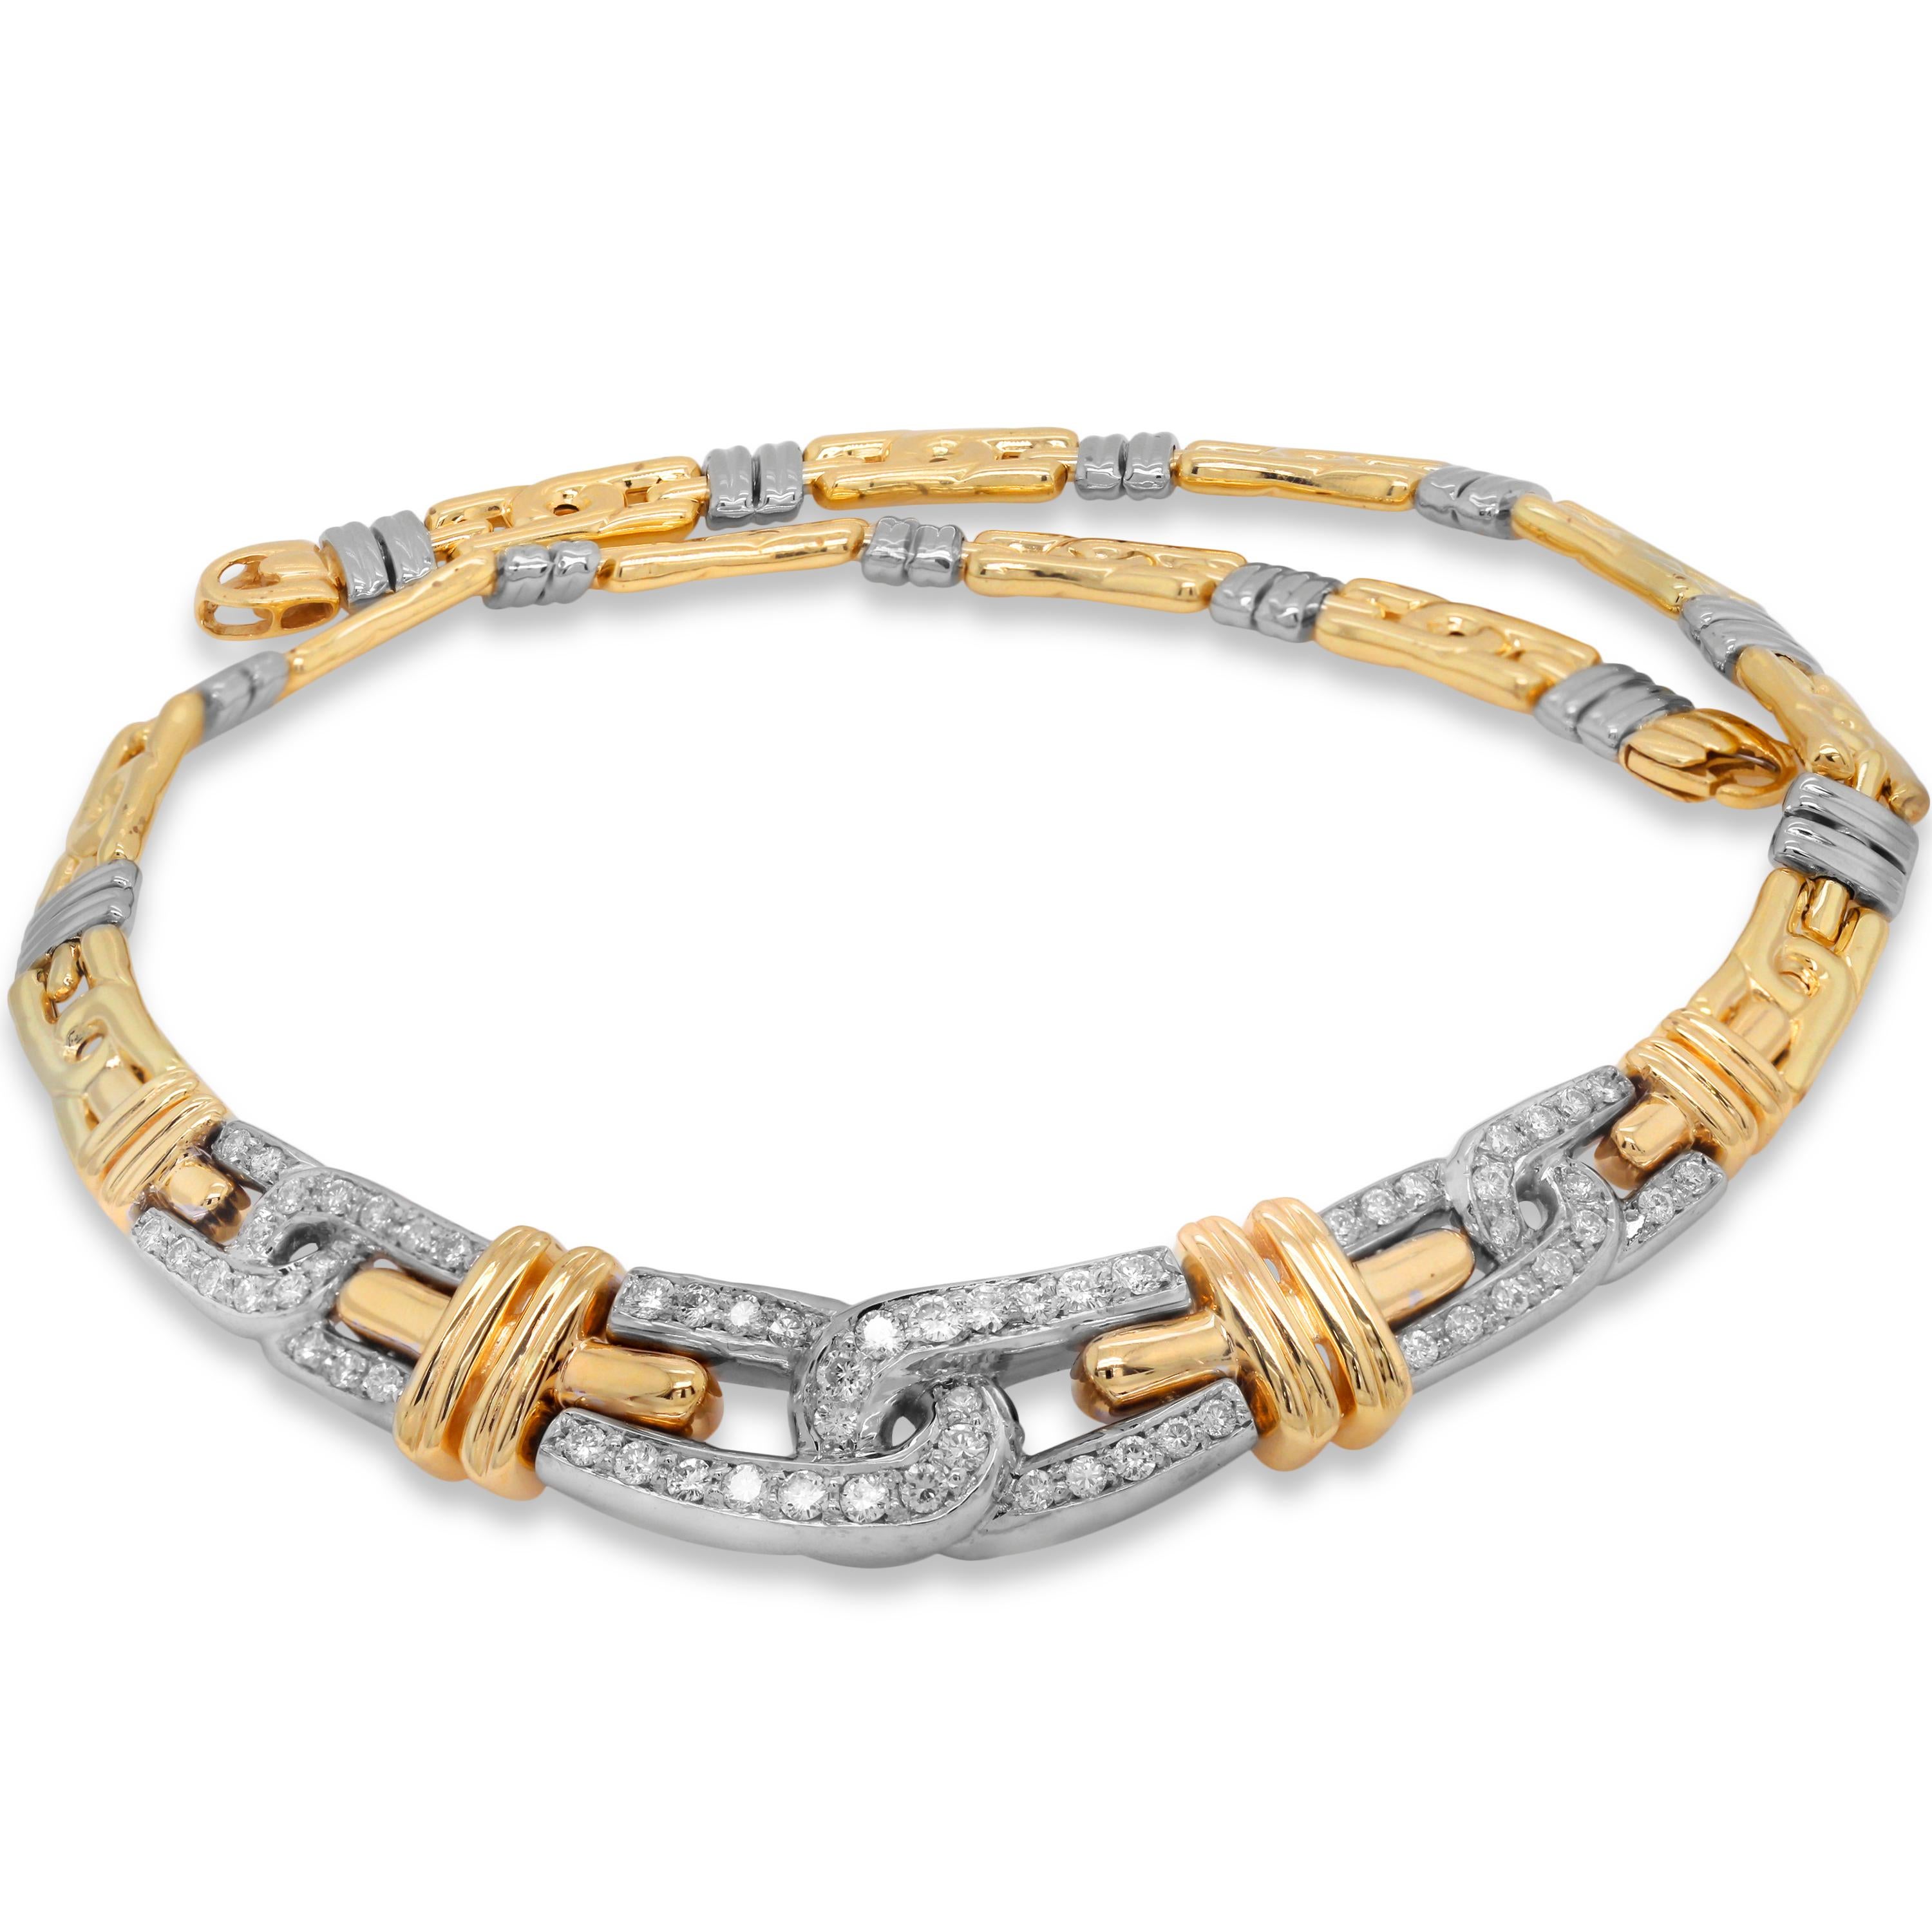 14K Yellow and White Gold and Diamond Choker Necklace

Apprx. 2.25 carat G color, VS clarity diamonds total weight

16 inchs in length.

Necklace uses a lobster clasp for secure clasping.

Made in Italy